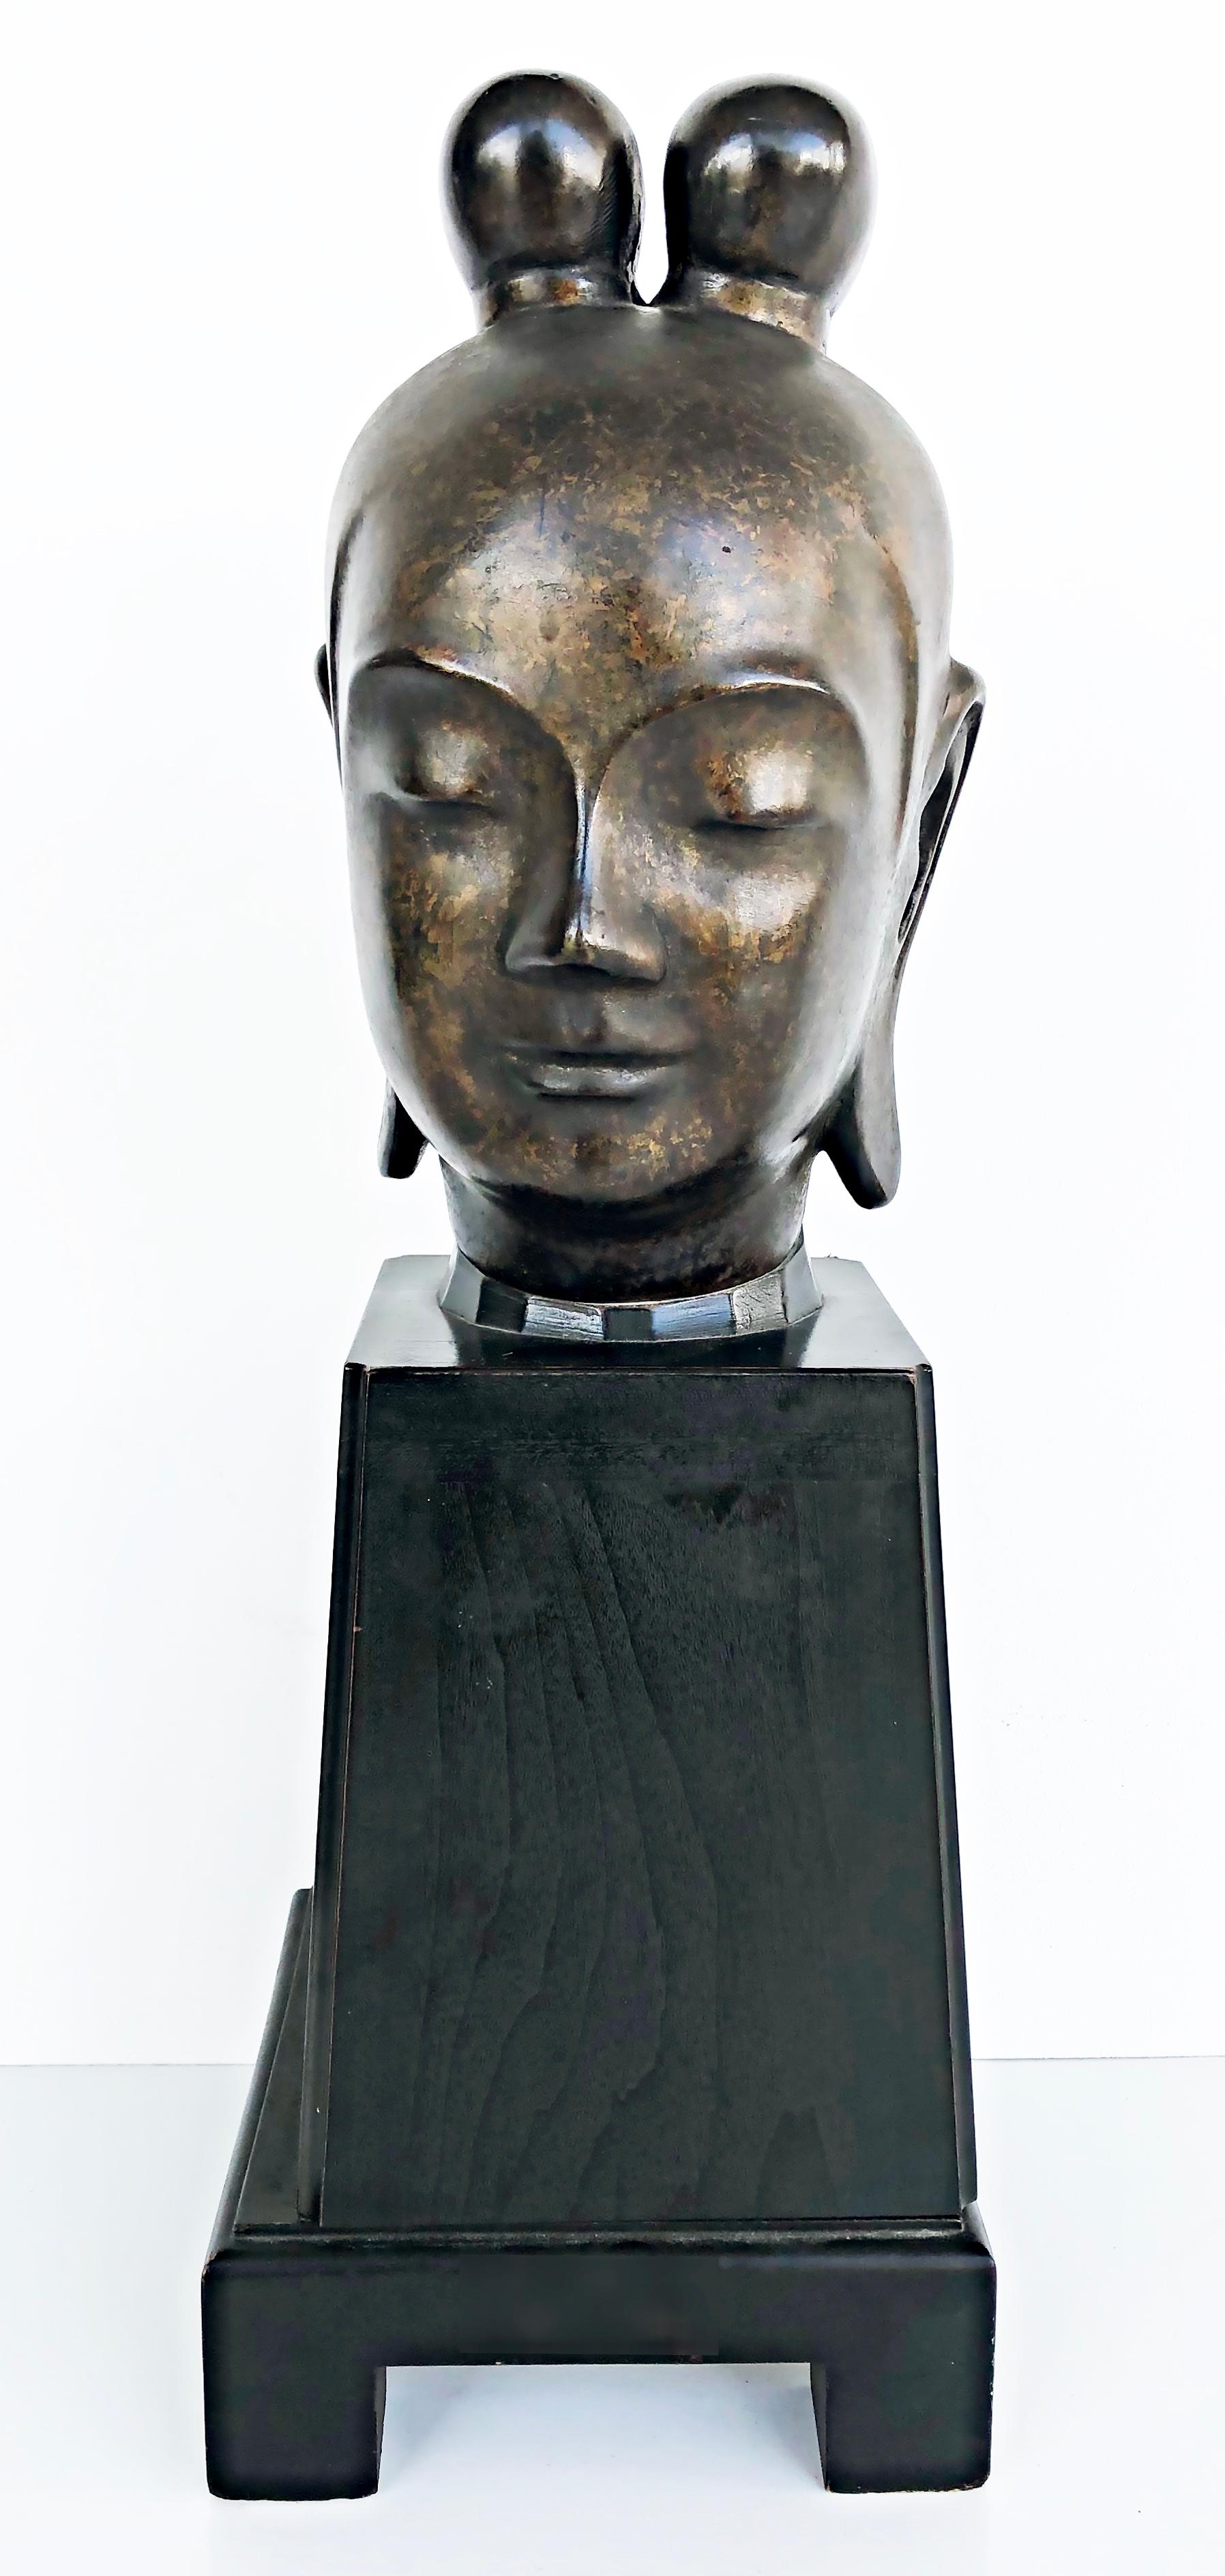 Mid-20th century Bronze Japanese Buddha Sculpture on Plinth

Offered for sale is a bronze early to mid 20th century Japanese figurative sculpture of a Buddha raised on a plinth. The base is offset from the bust.